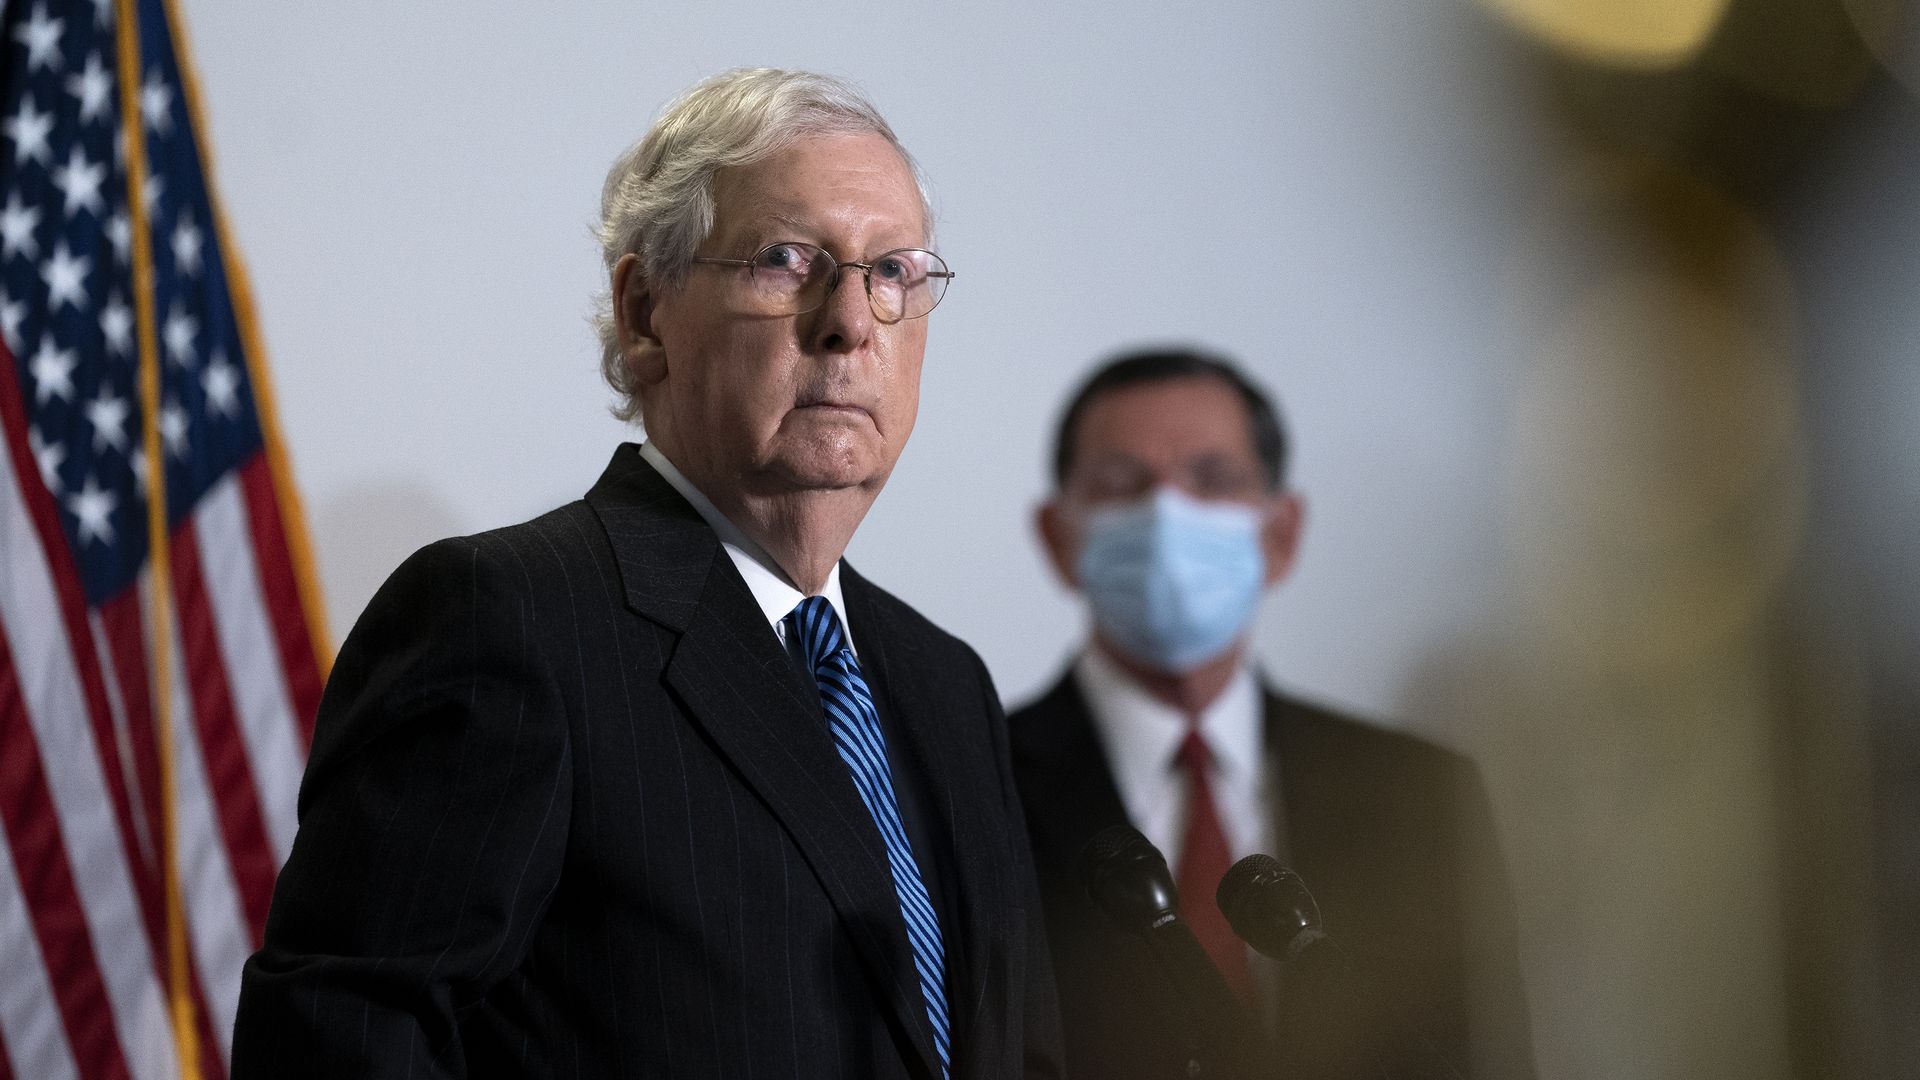  Senate Majority Leader Mitch McConnell (R-KY) 